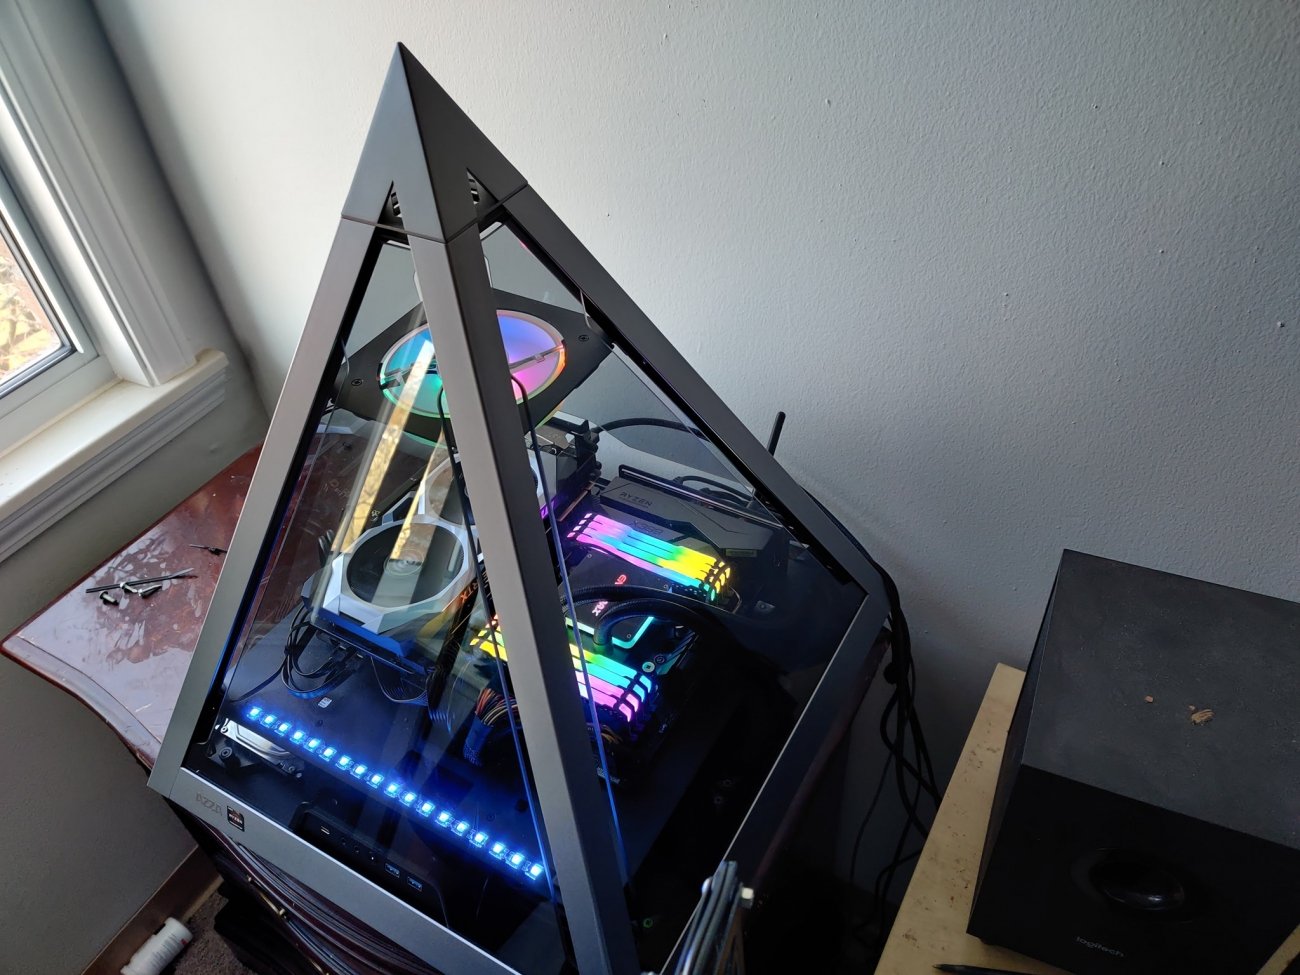 Check out this PC built glass pyramid